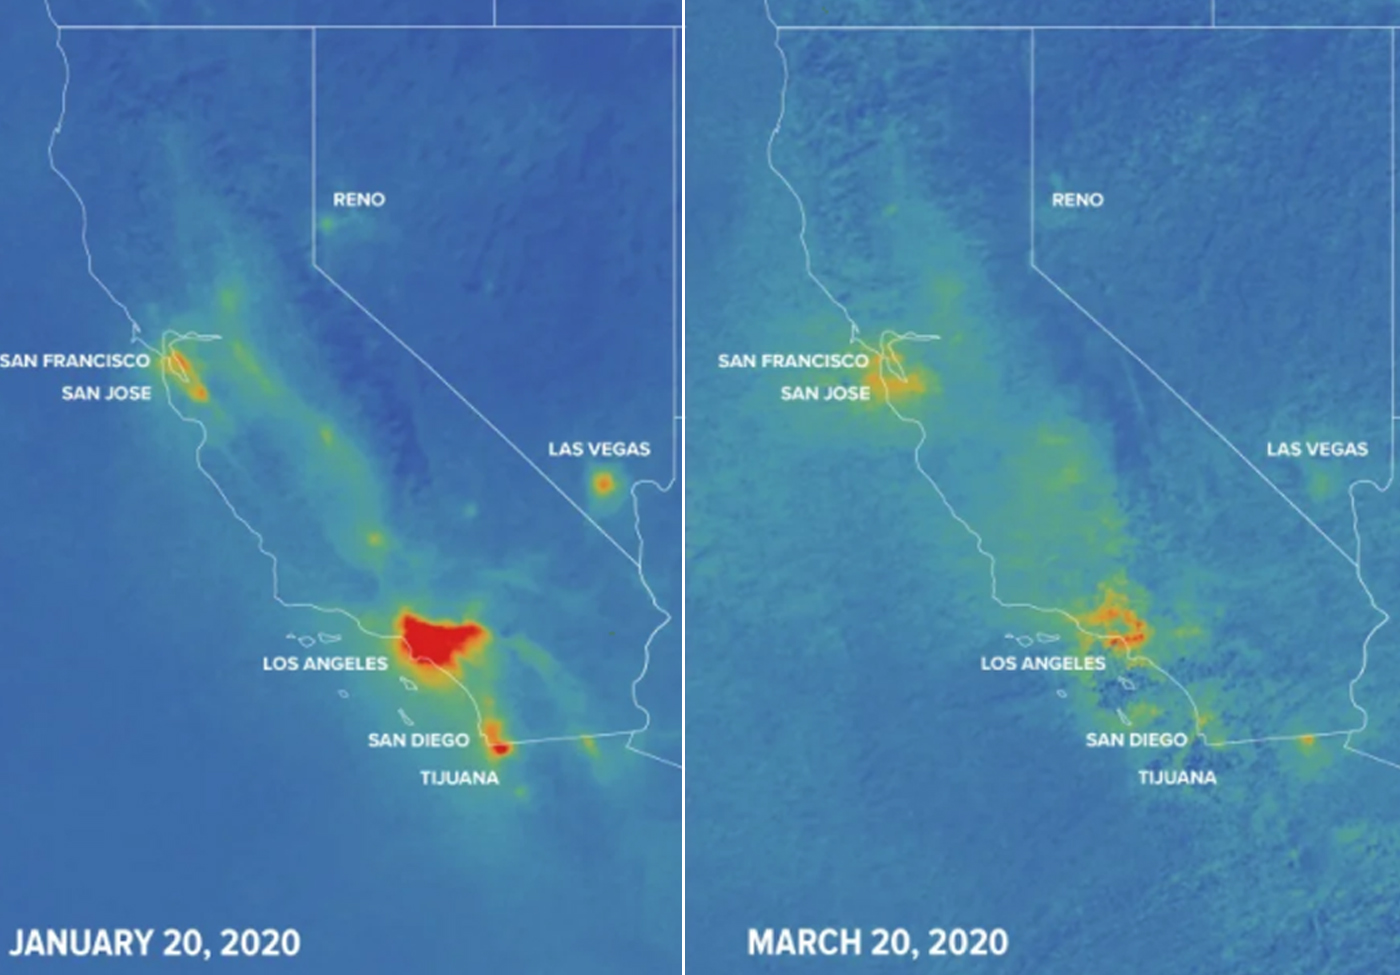 Earther/Gizmodo’s satellite images from Jan 2020 and March 2020 showing the impact of coronavirus on pollution and the climate.